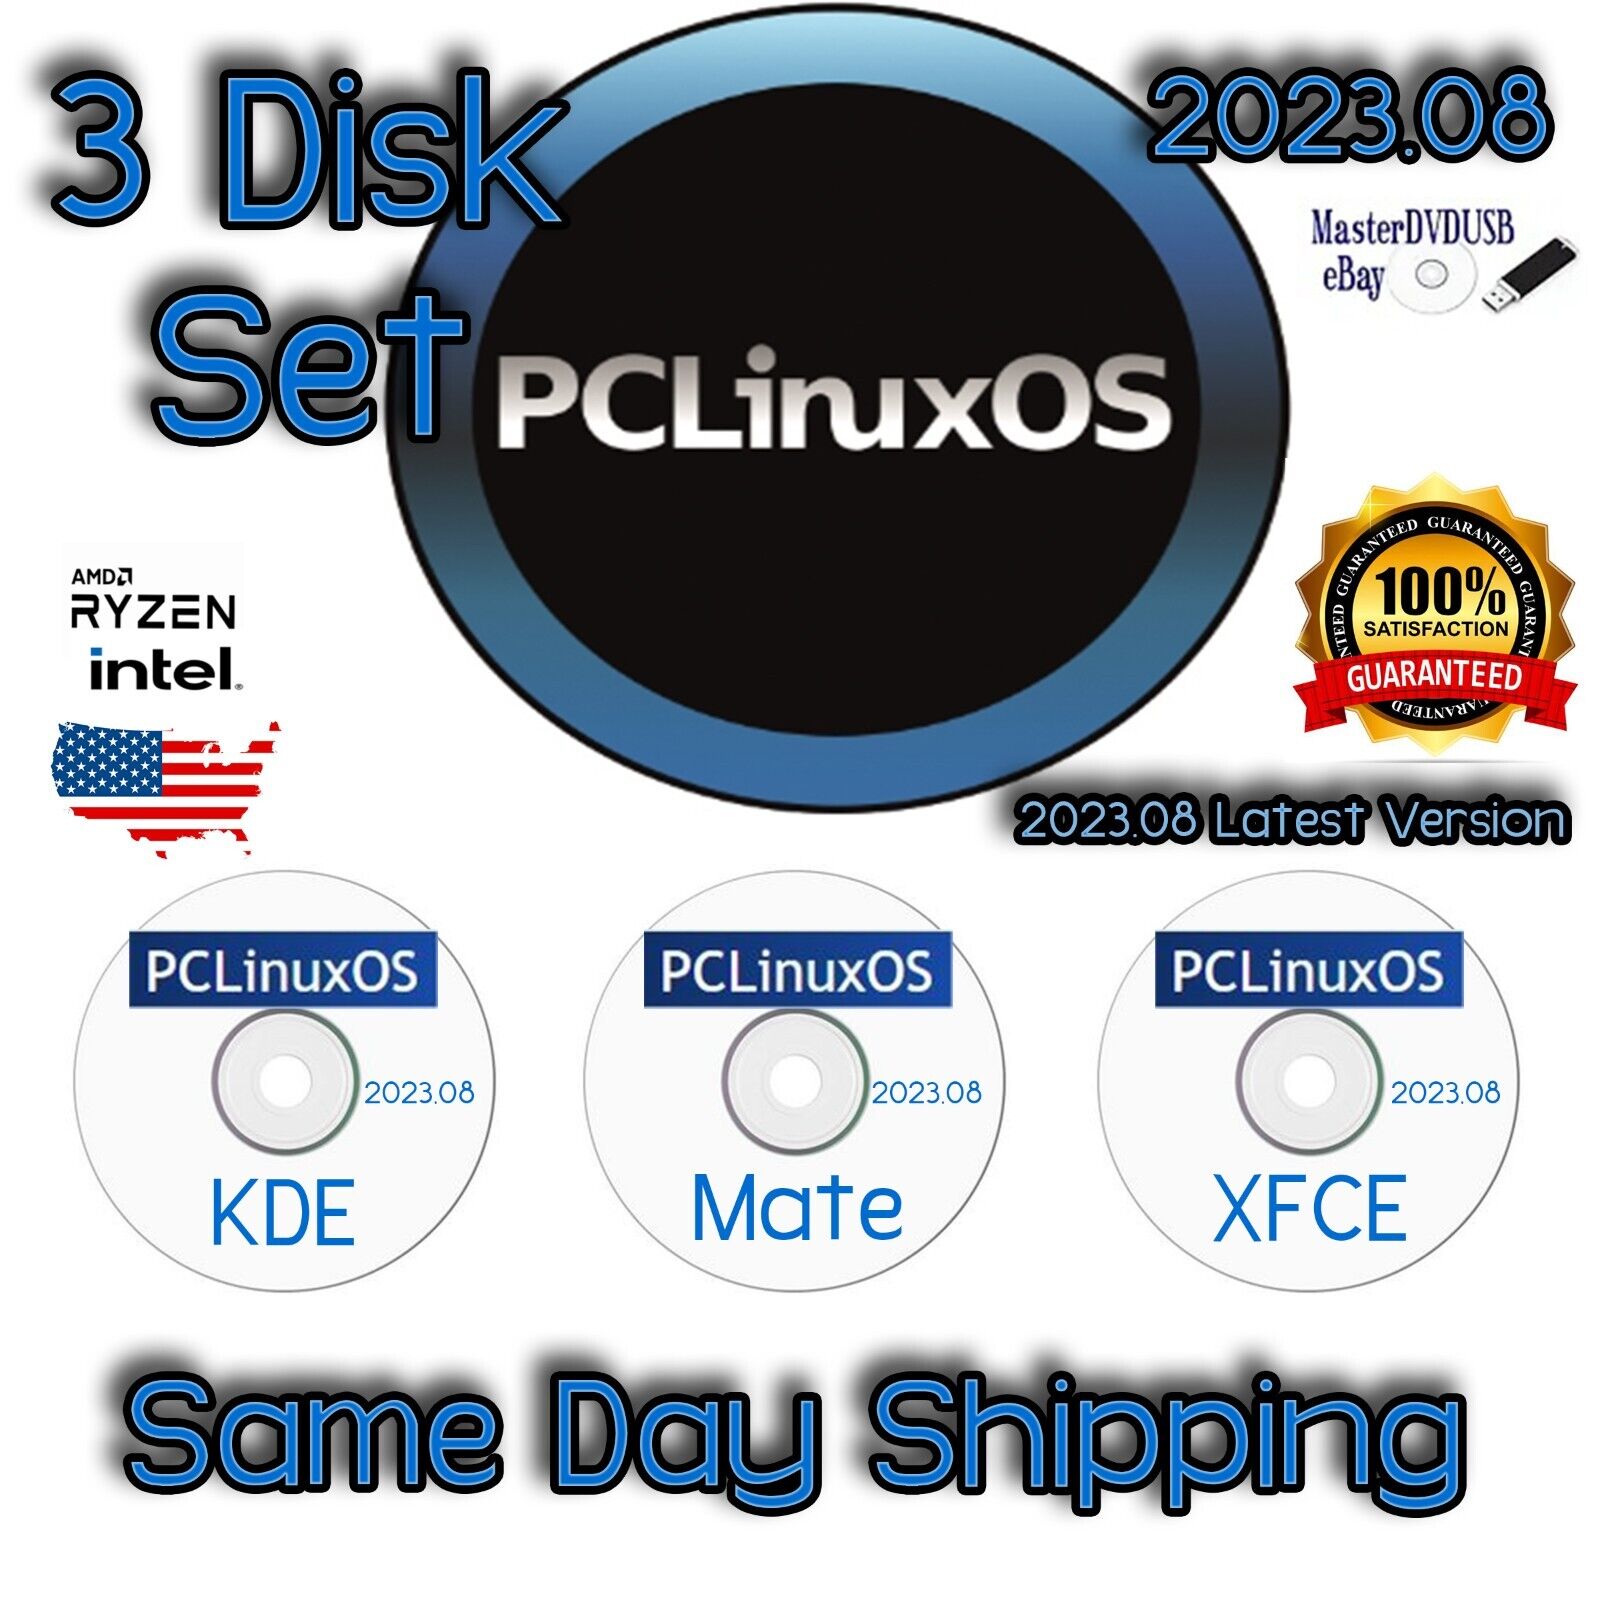 PC Linux OS 3 DVD Set with KDE MATE and XFCE | Color Labels | Same Day Shipping